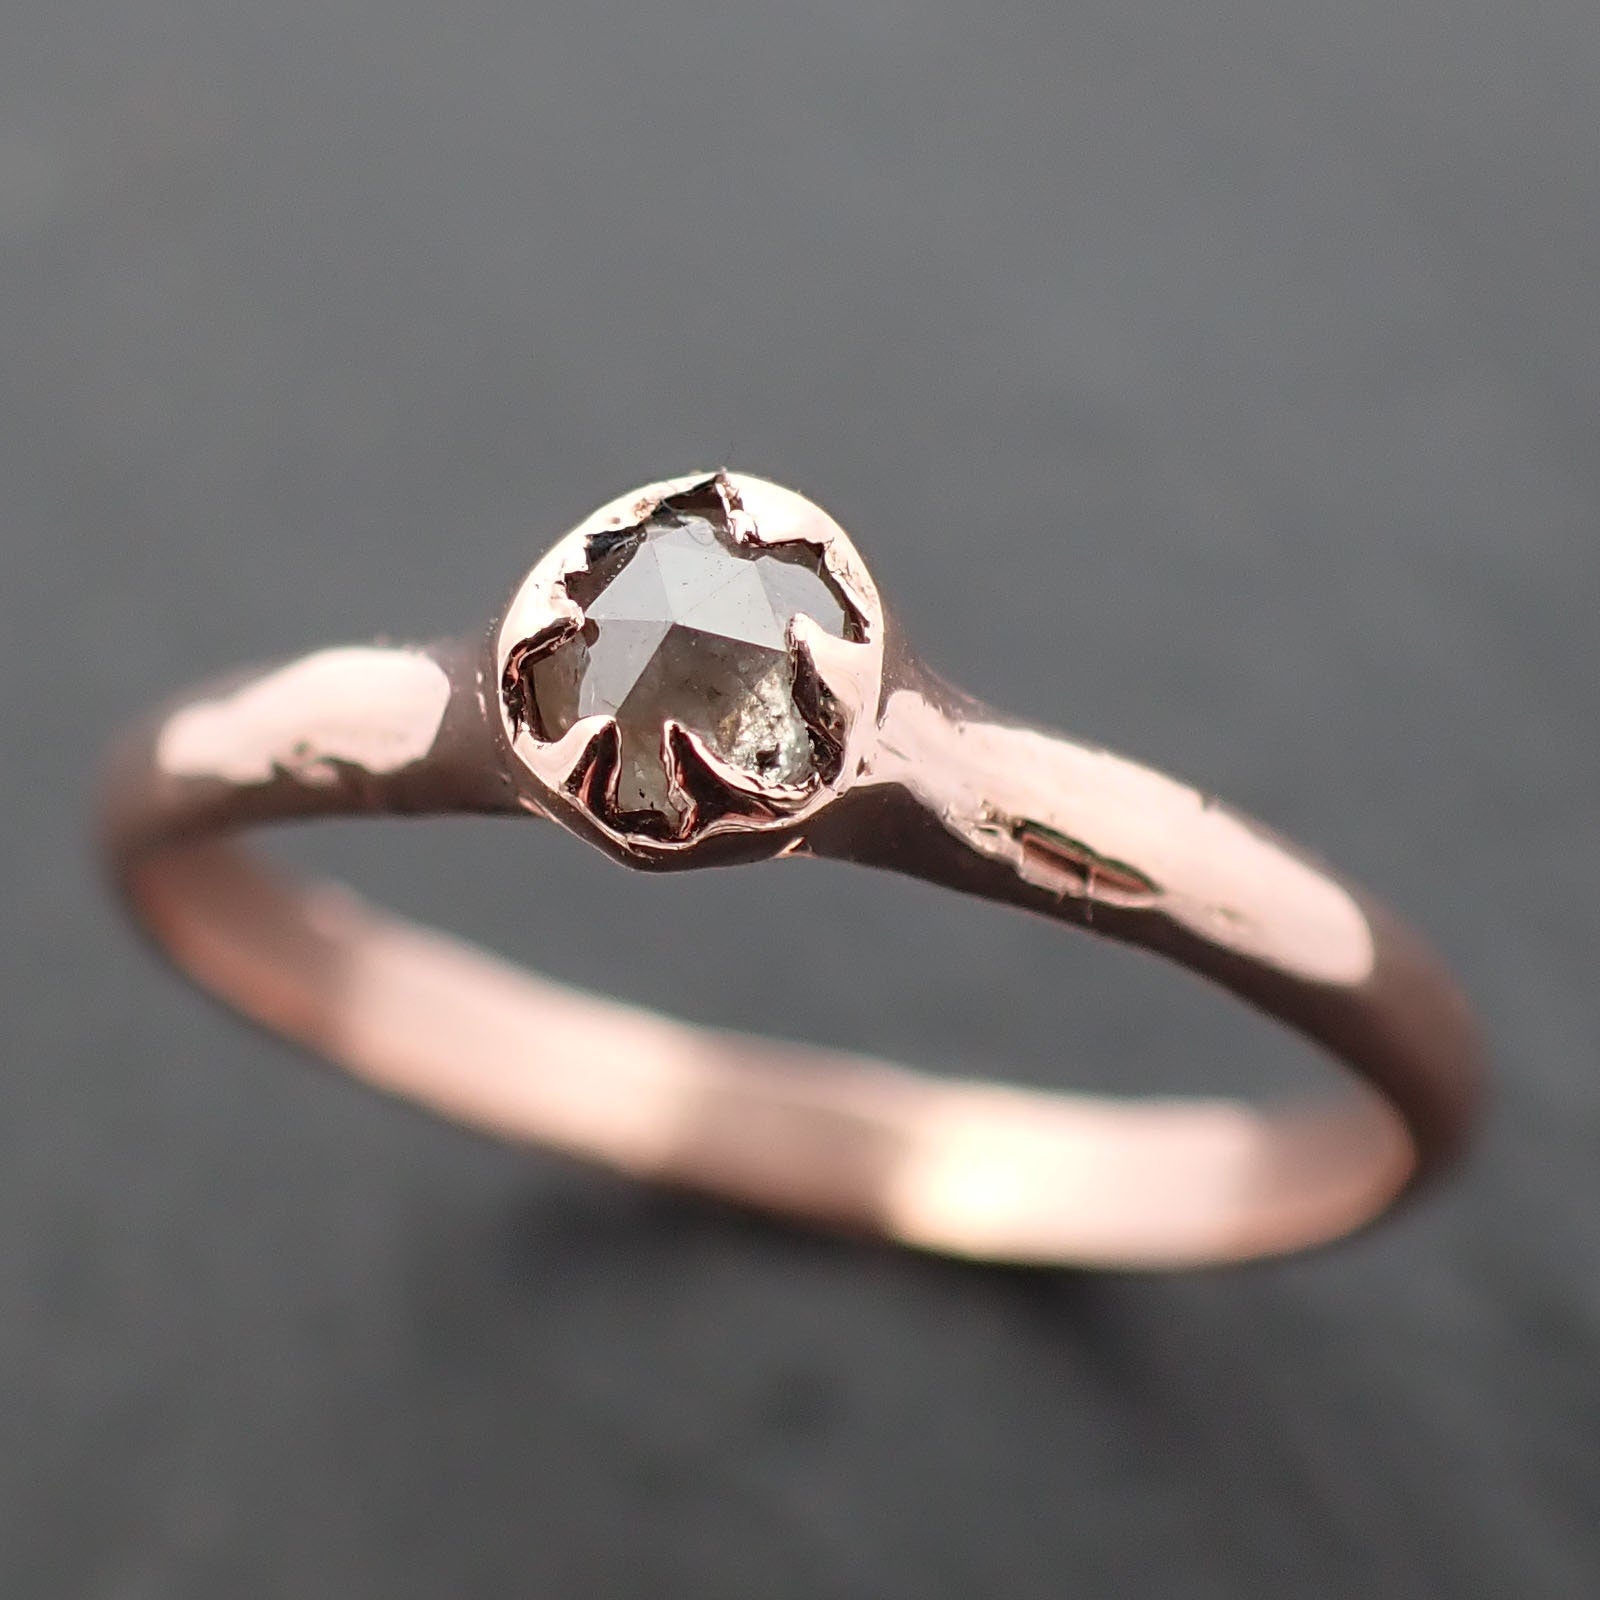 Faceted Fancy cut gray Diamond Solitaire Engagement 14k Rose Gold Wedding Ring byAngeline 3504